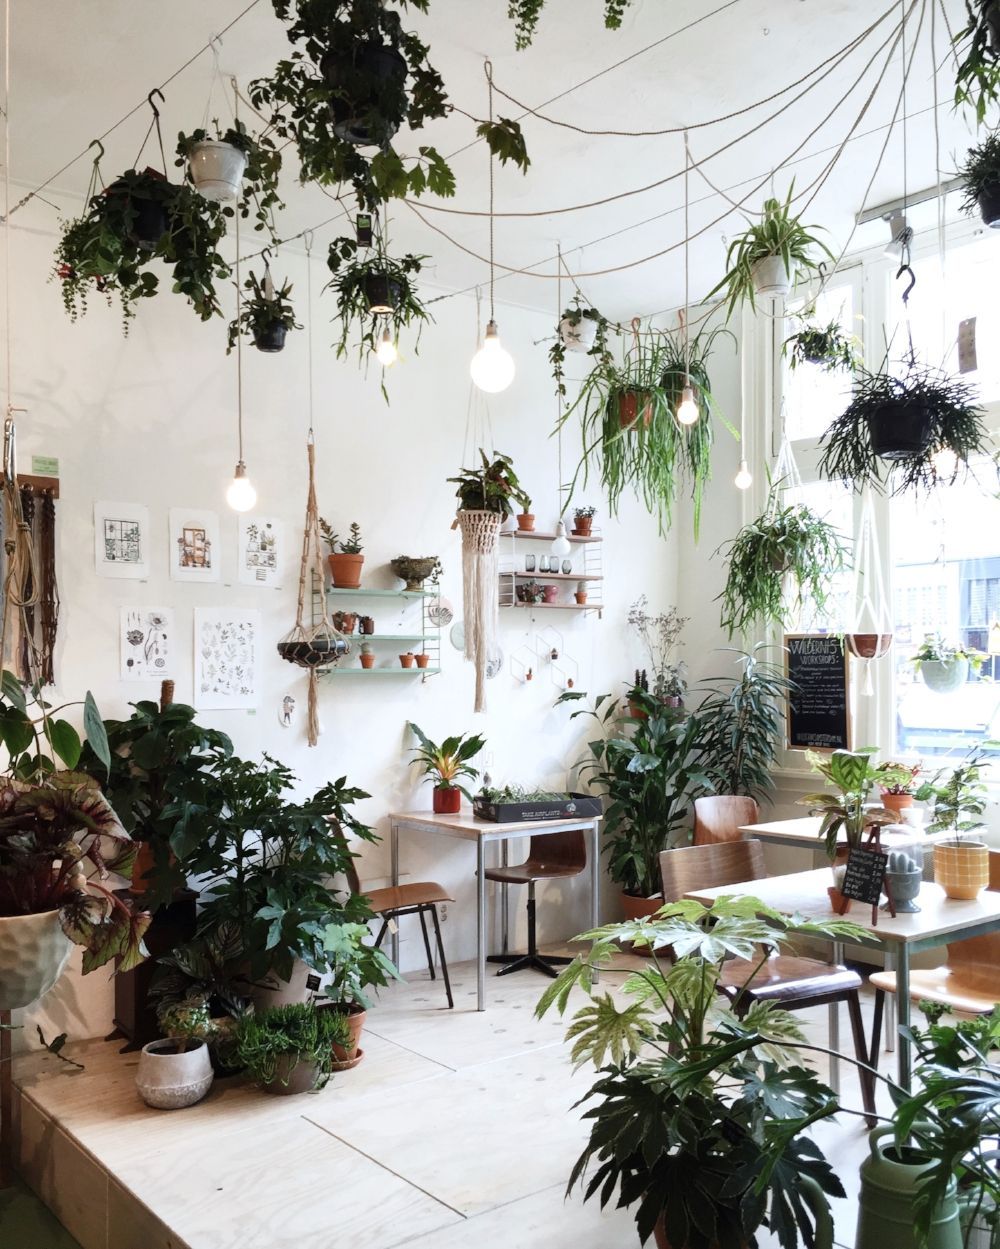 Green Amsterdam -   15 electrical plants Room ideas